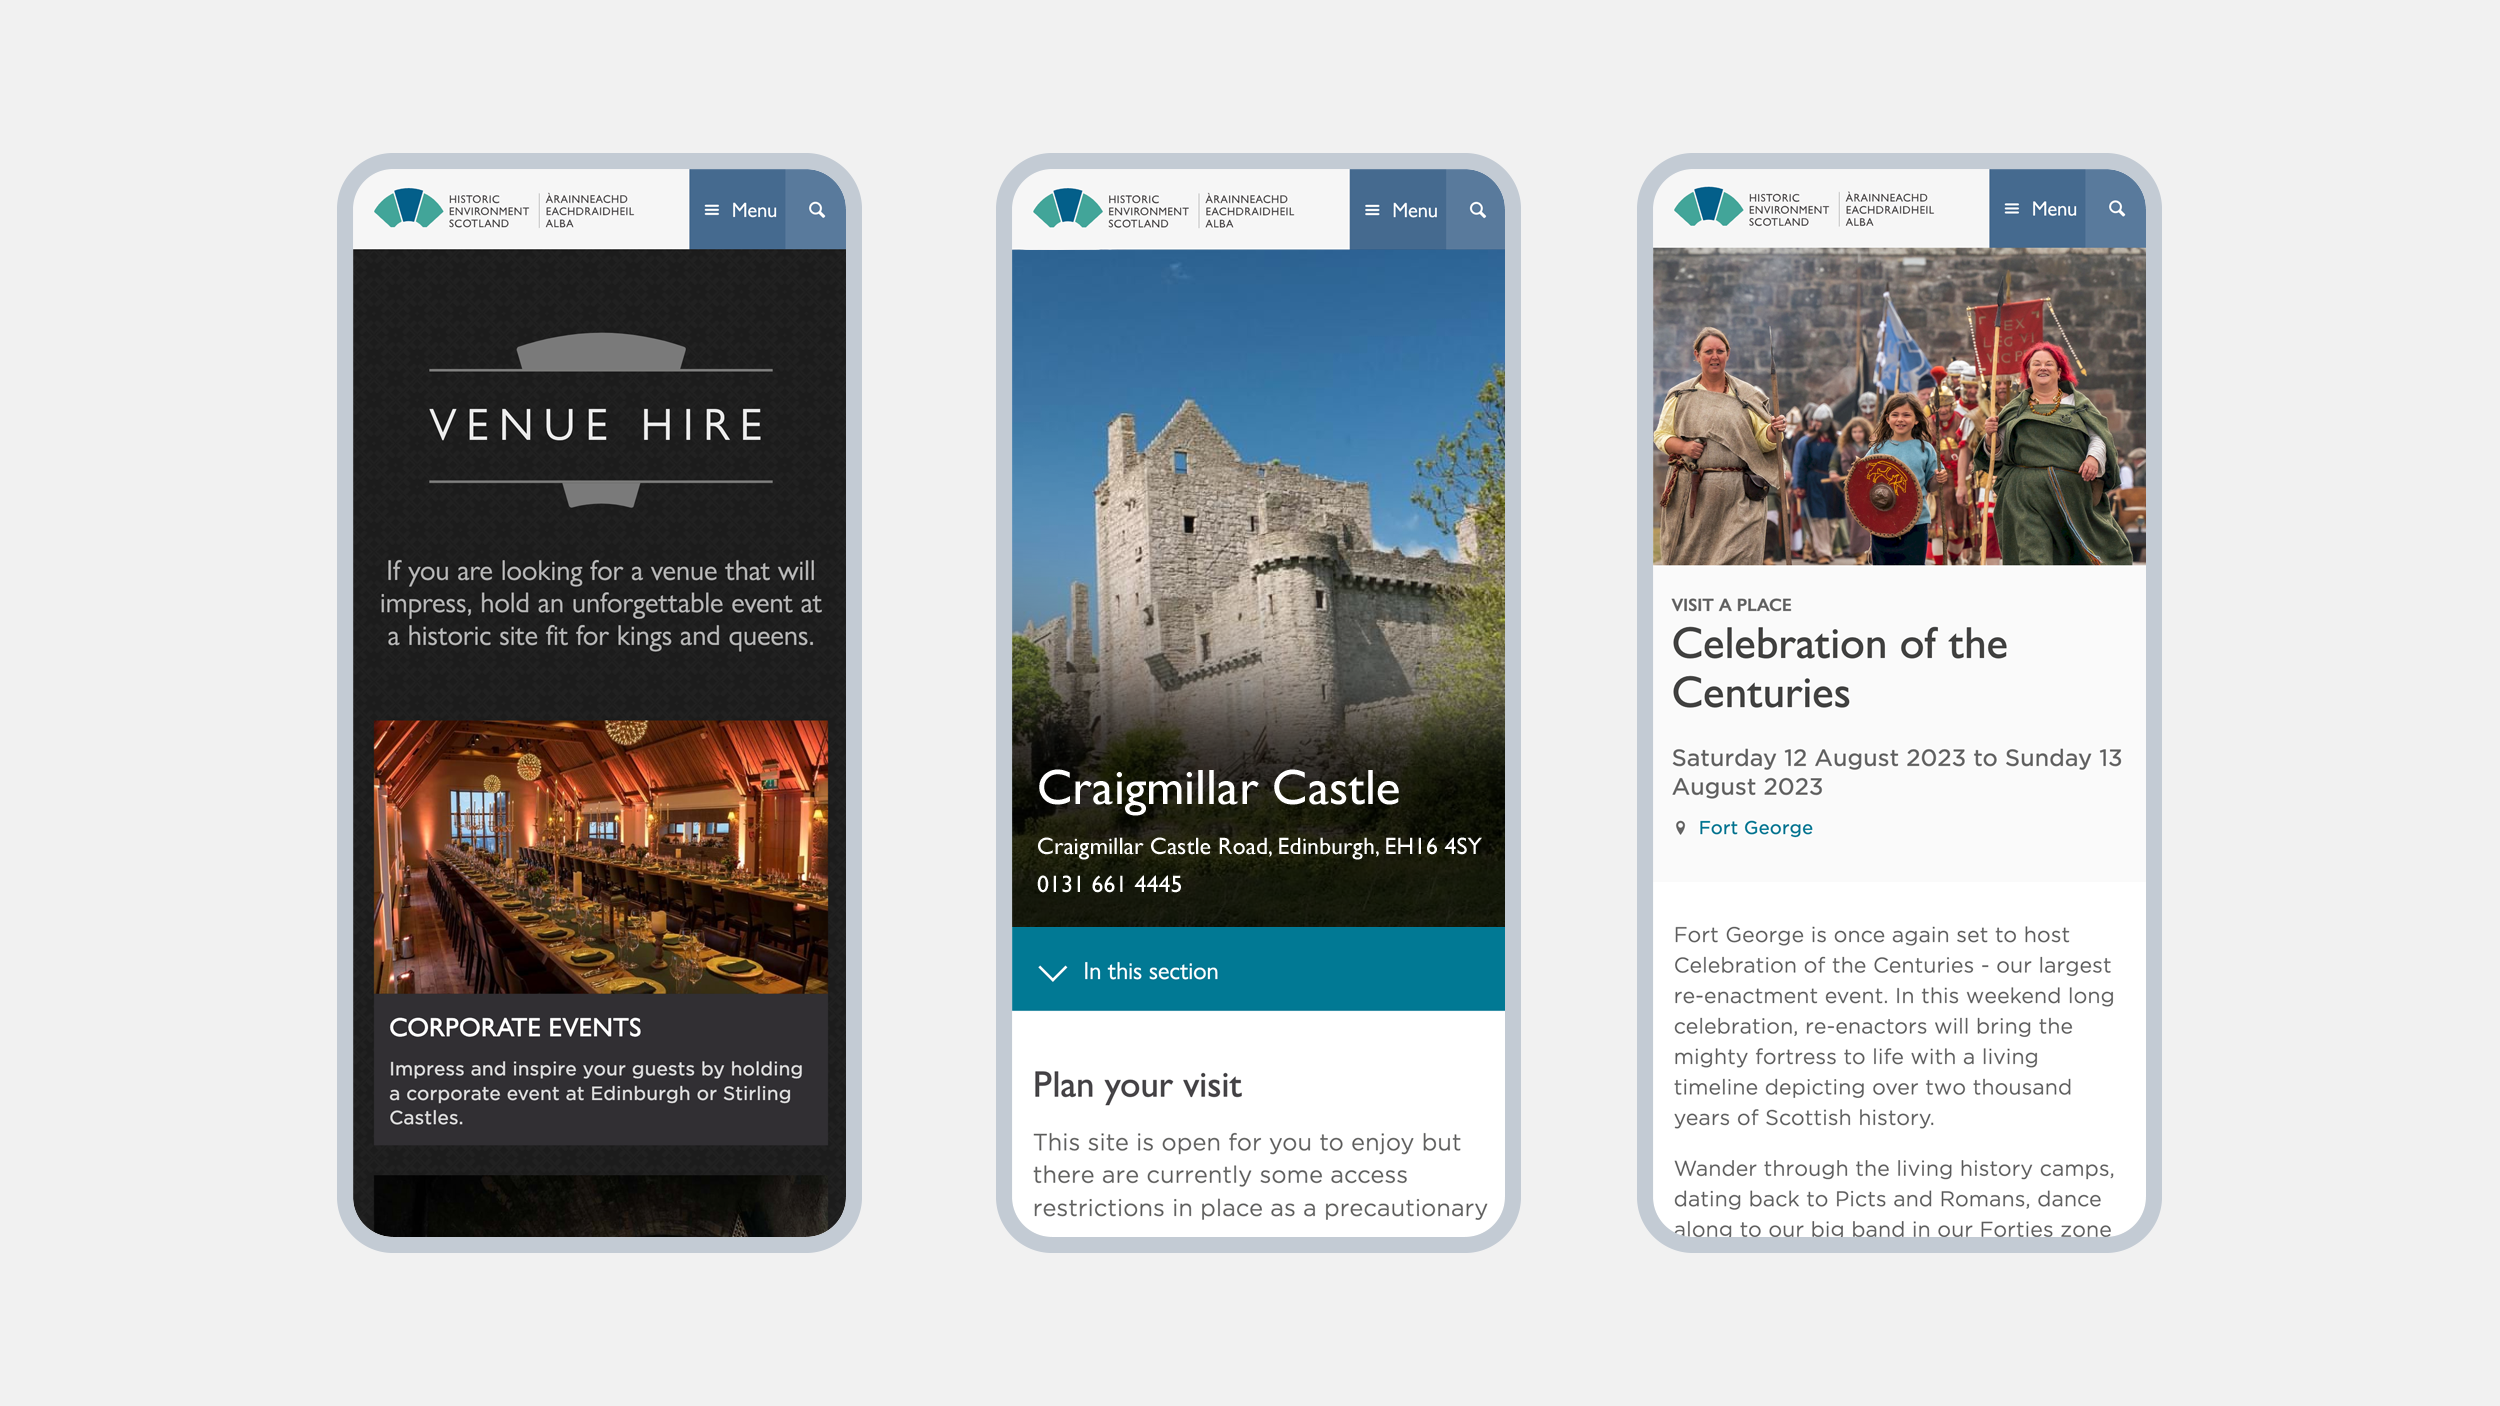 Three small screen views of pages on the HES website - venue hire, Craigmillar Castle, and the Celebration of the Centuries event